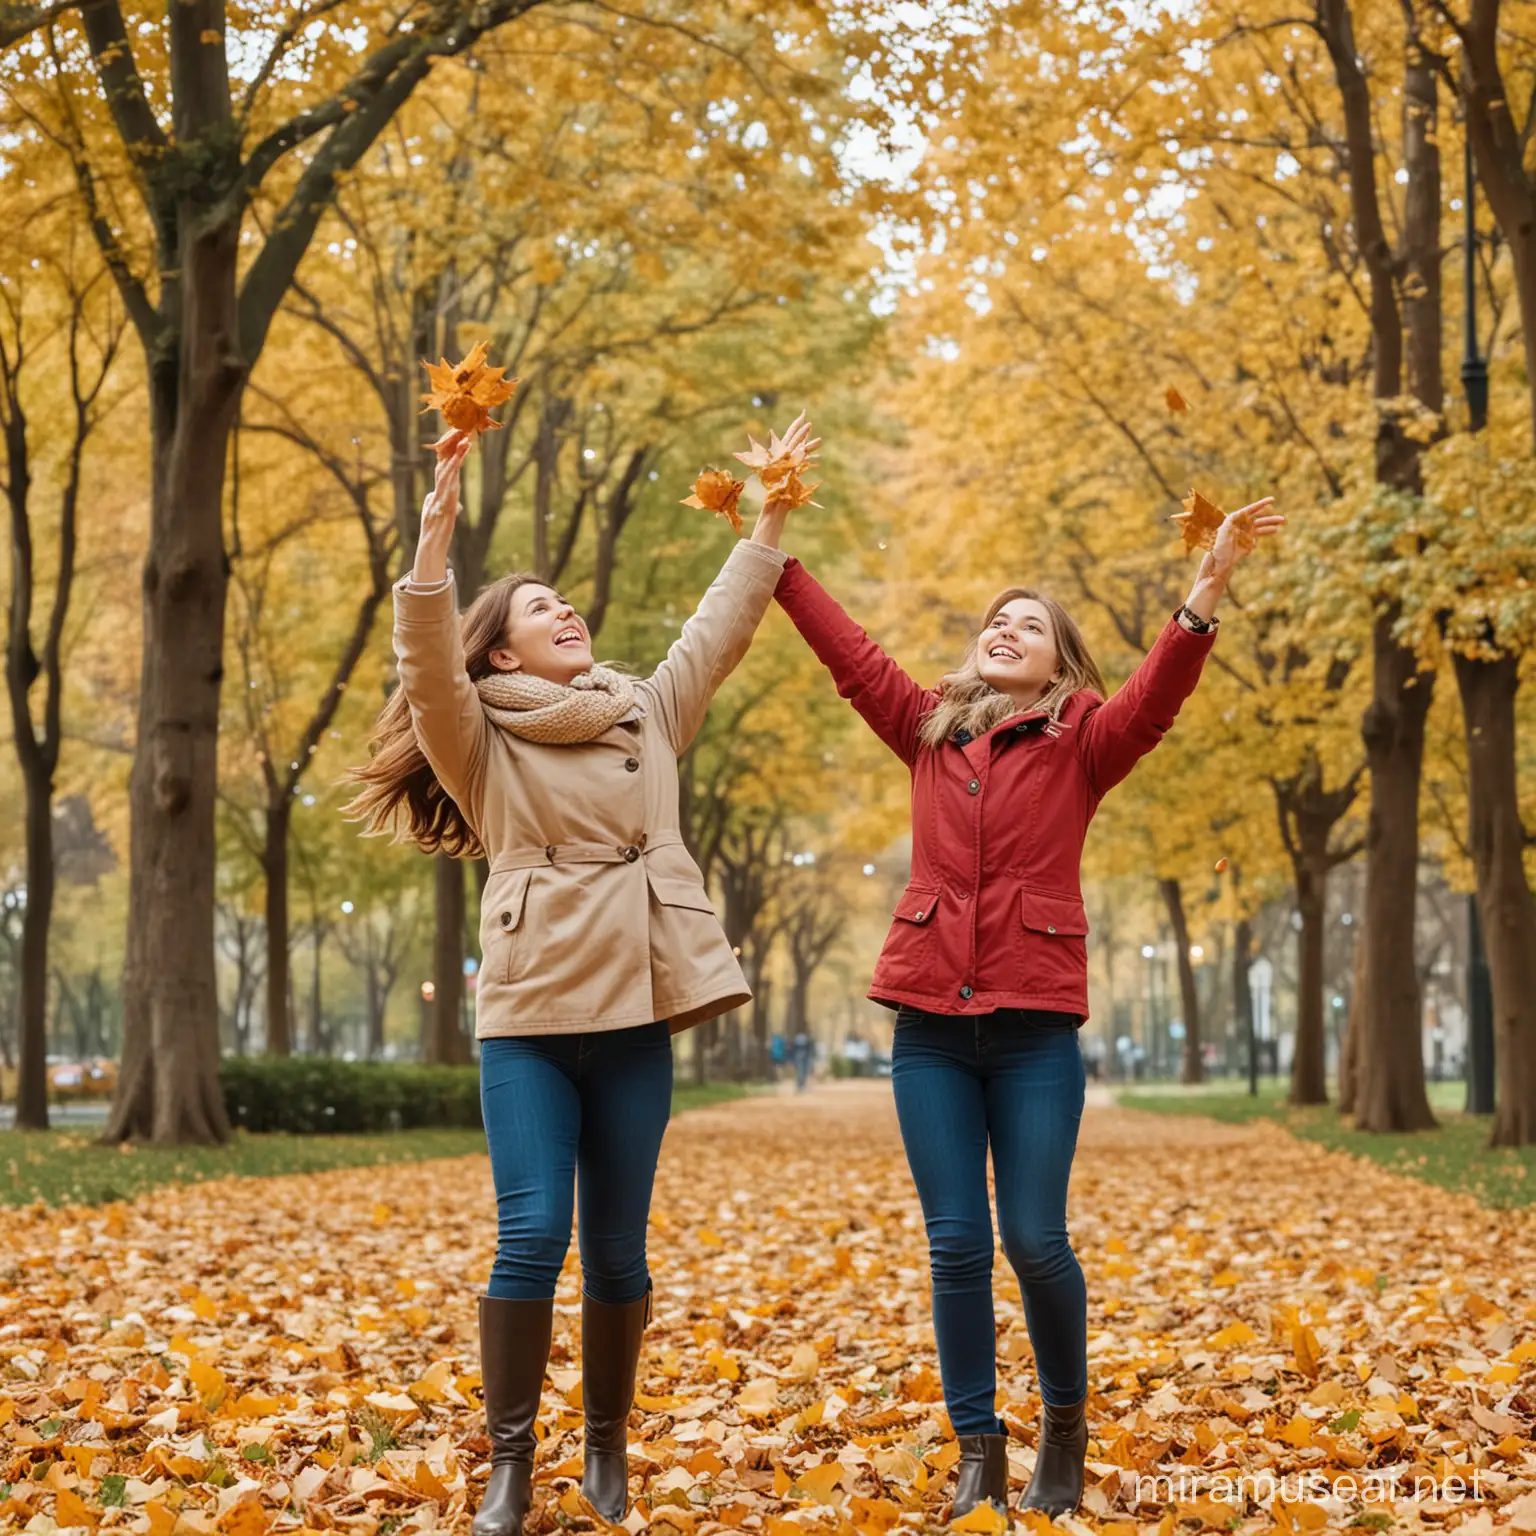 Playful mother and daughter throwing autumn leaves in park


